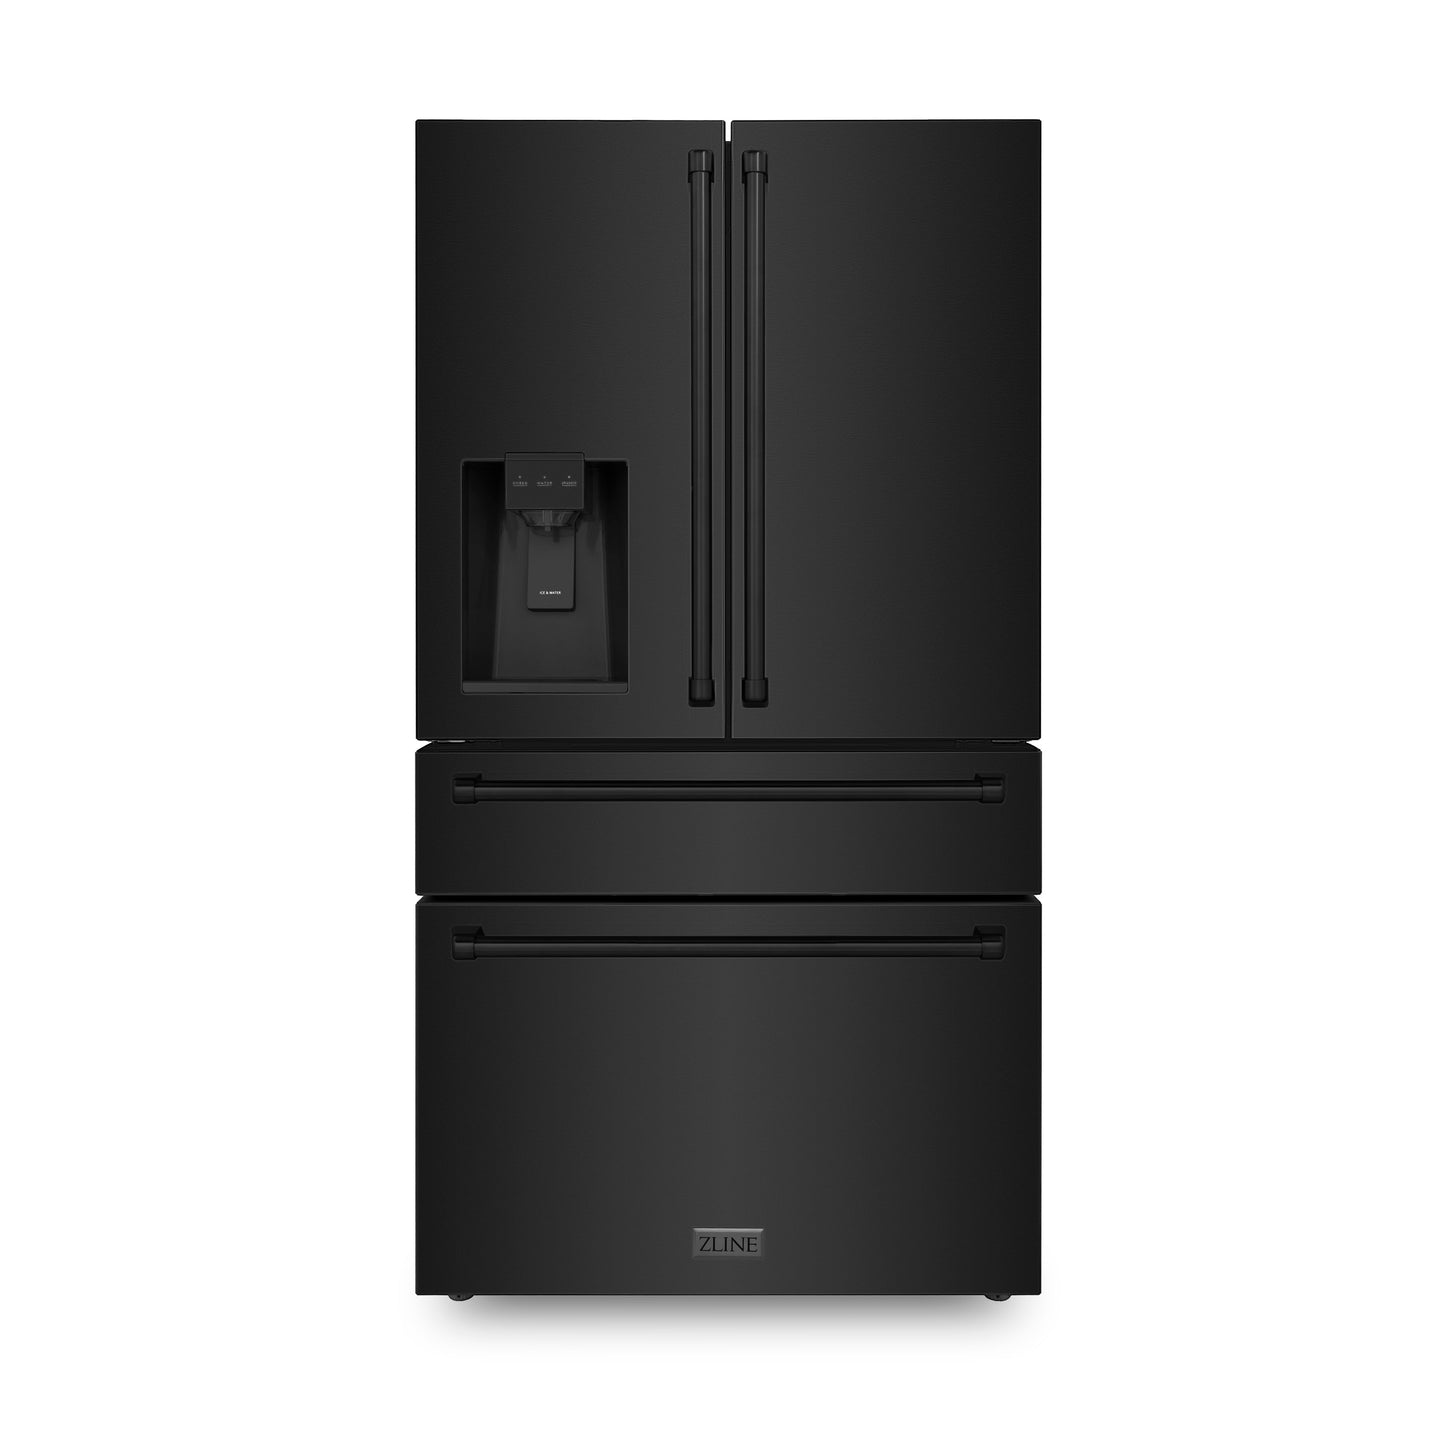 ZLINE 36" 21.6 cu. Ft. French Door Refrigerator with Water and Ice Dispenser and Water Filter in DuraSnow® Black Stainless Steel, RFM-W-WF-36-BS